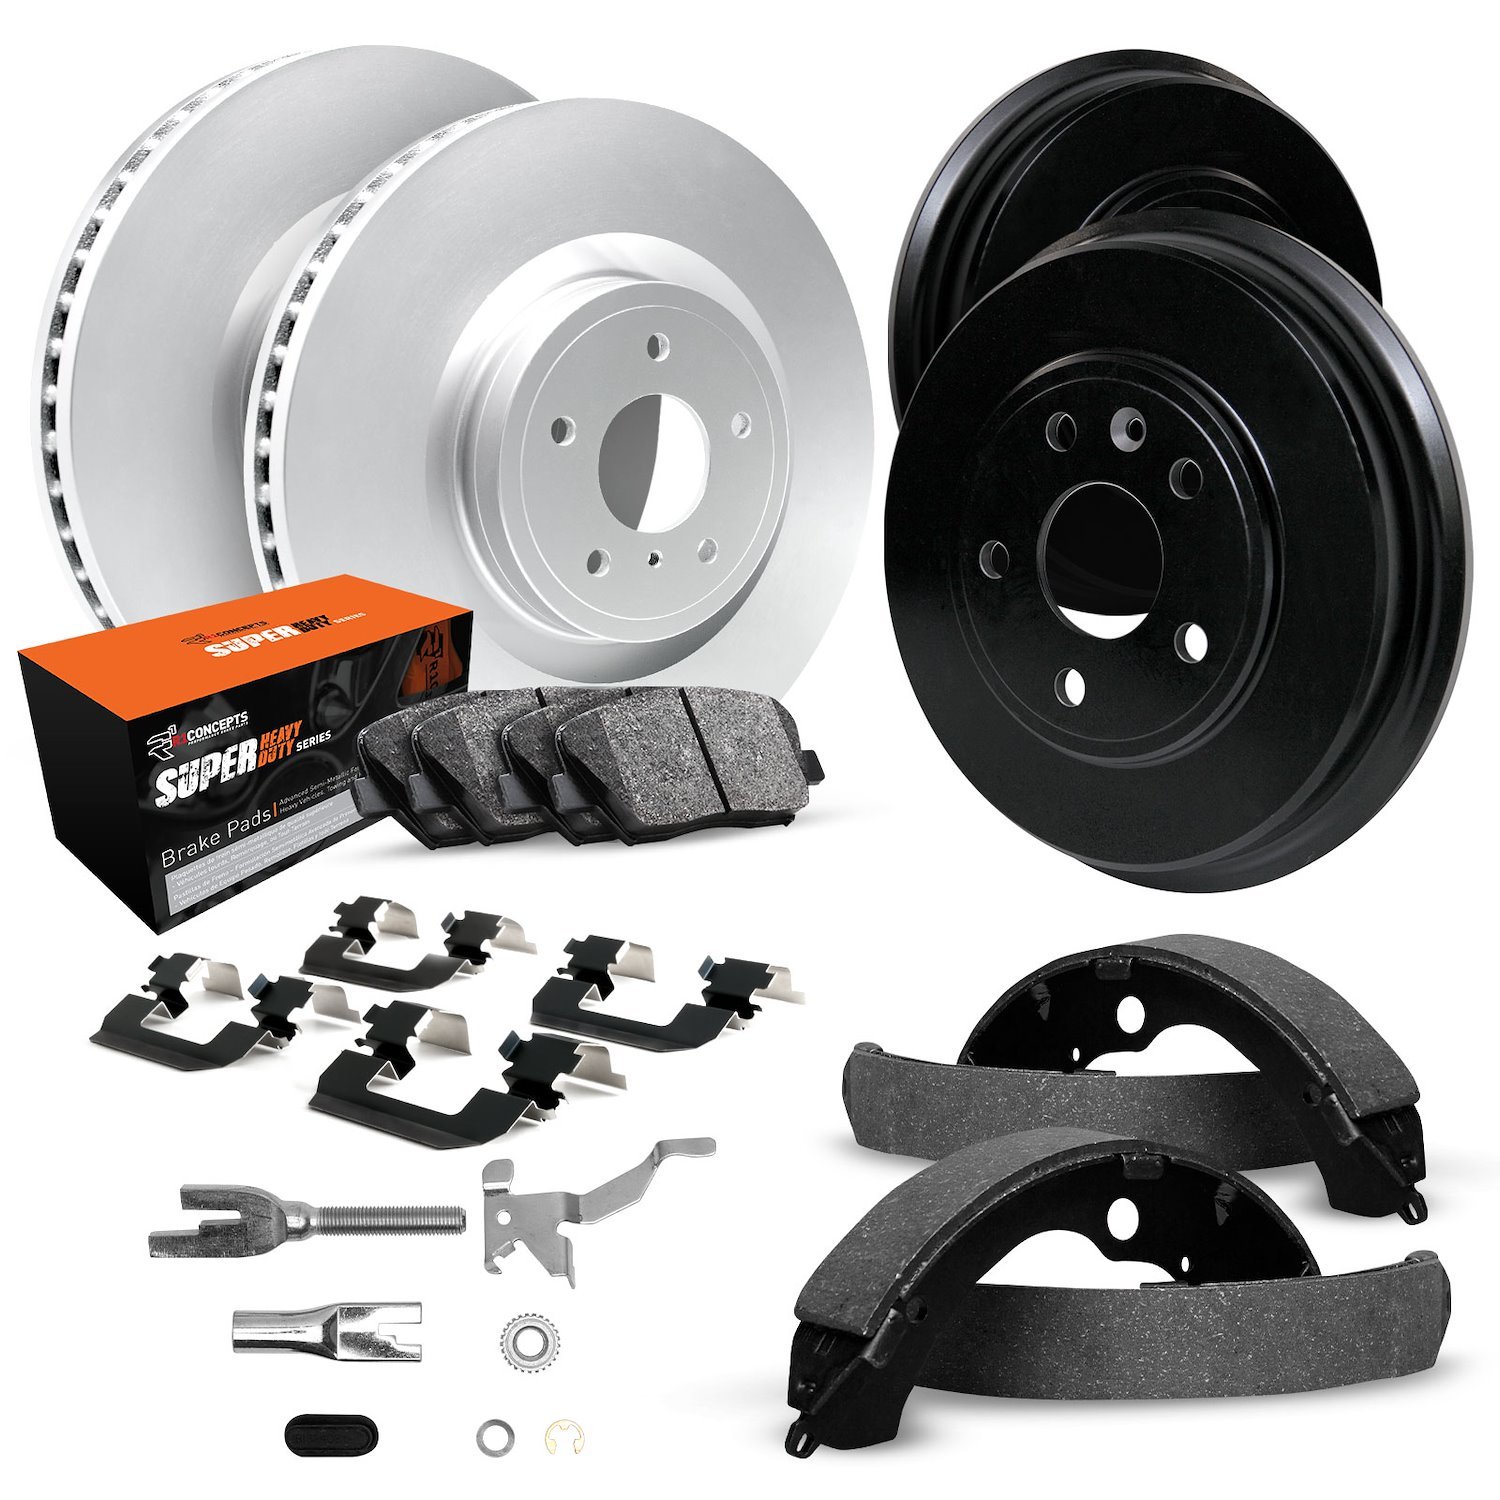 GEO-Carbon Brake Rotor & Drum Set w/Super-Duty Pads, Shoes, Hardware/Adjusters, 1998-2000 GM, Position: Front & Rear